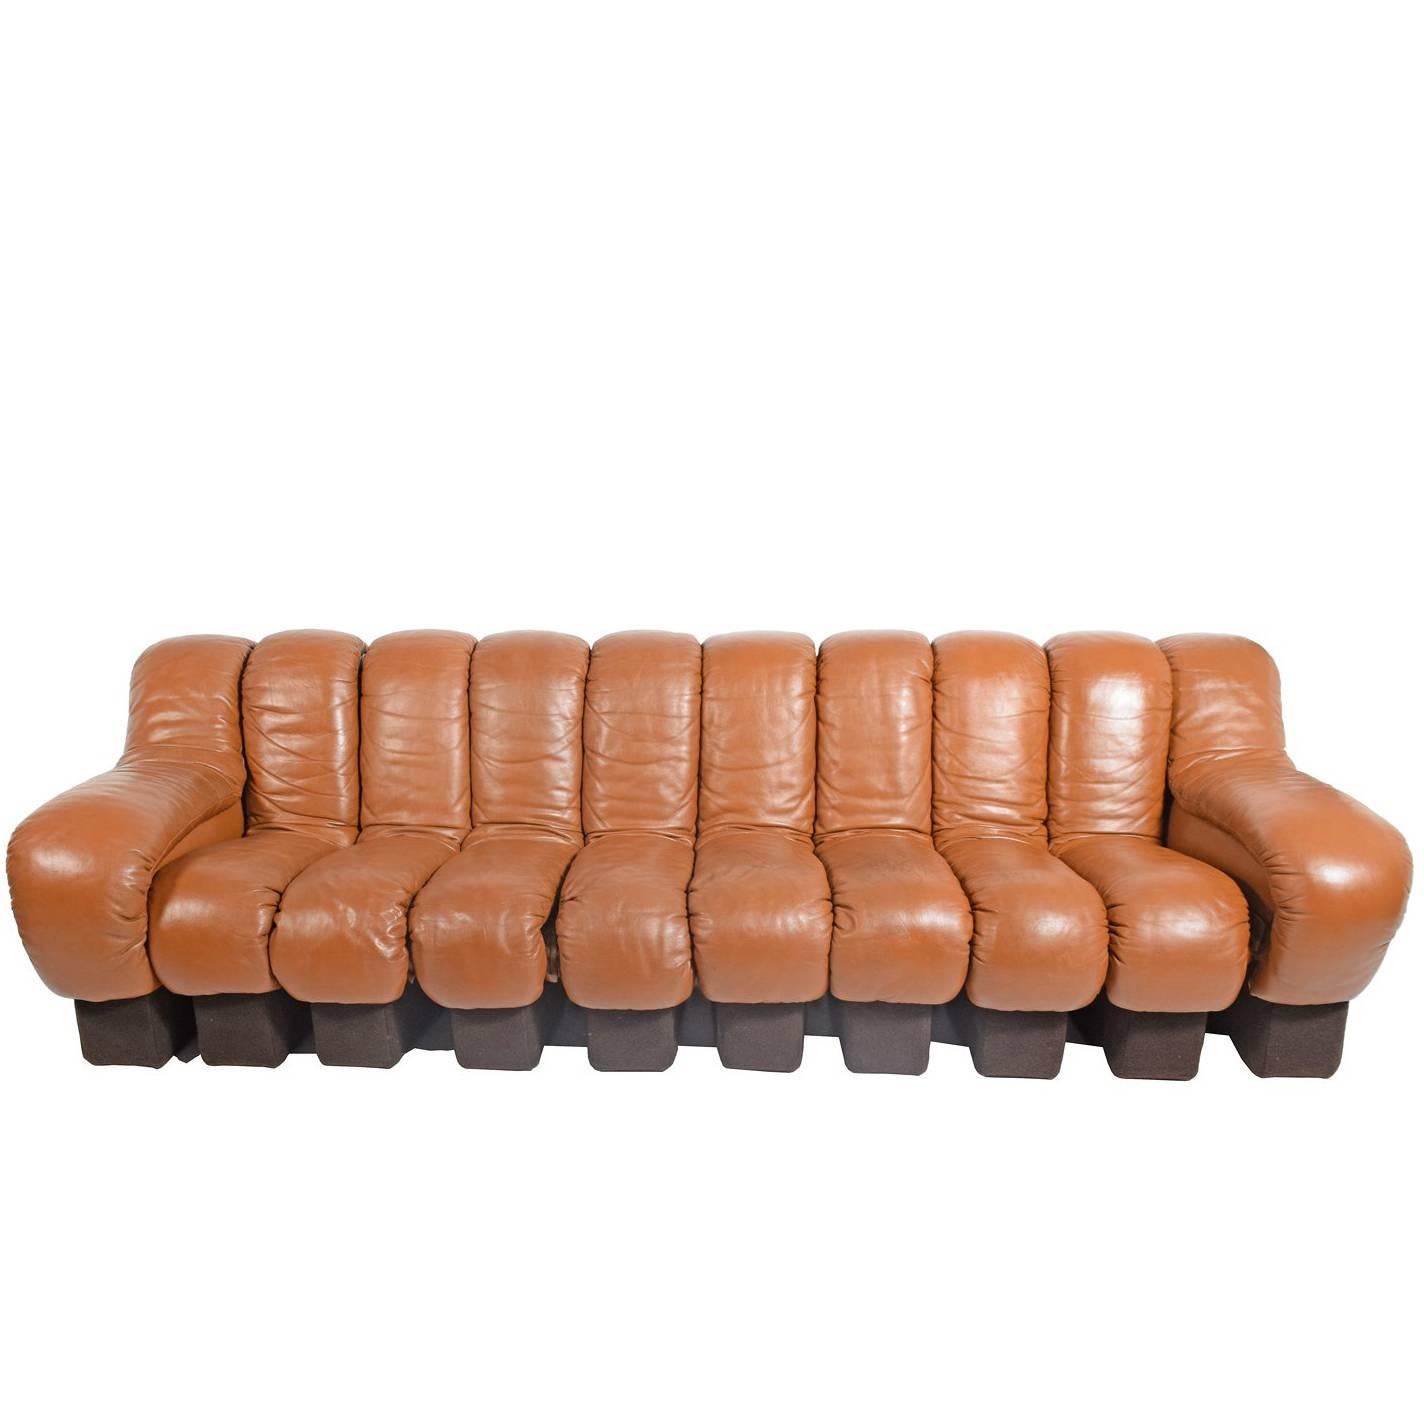 10-Section ‘Non-Stop’ Sofa by Riva, Ulrich Vogt for De Sade Imported by Stending